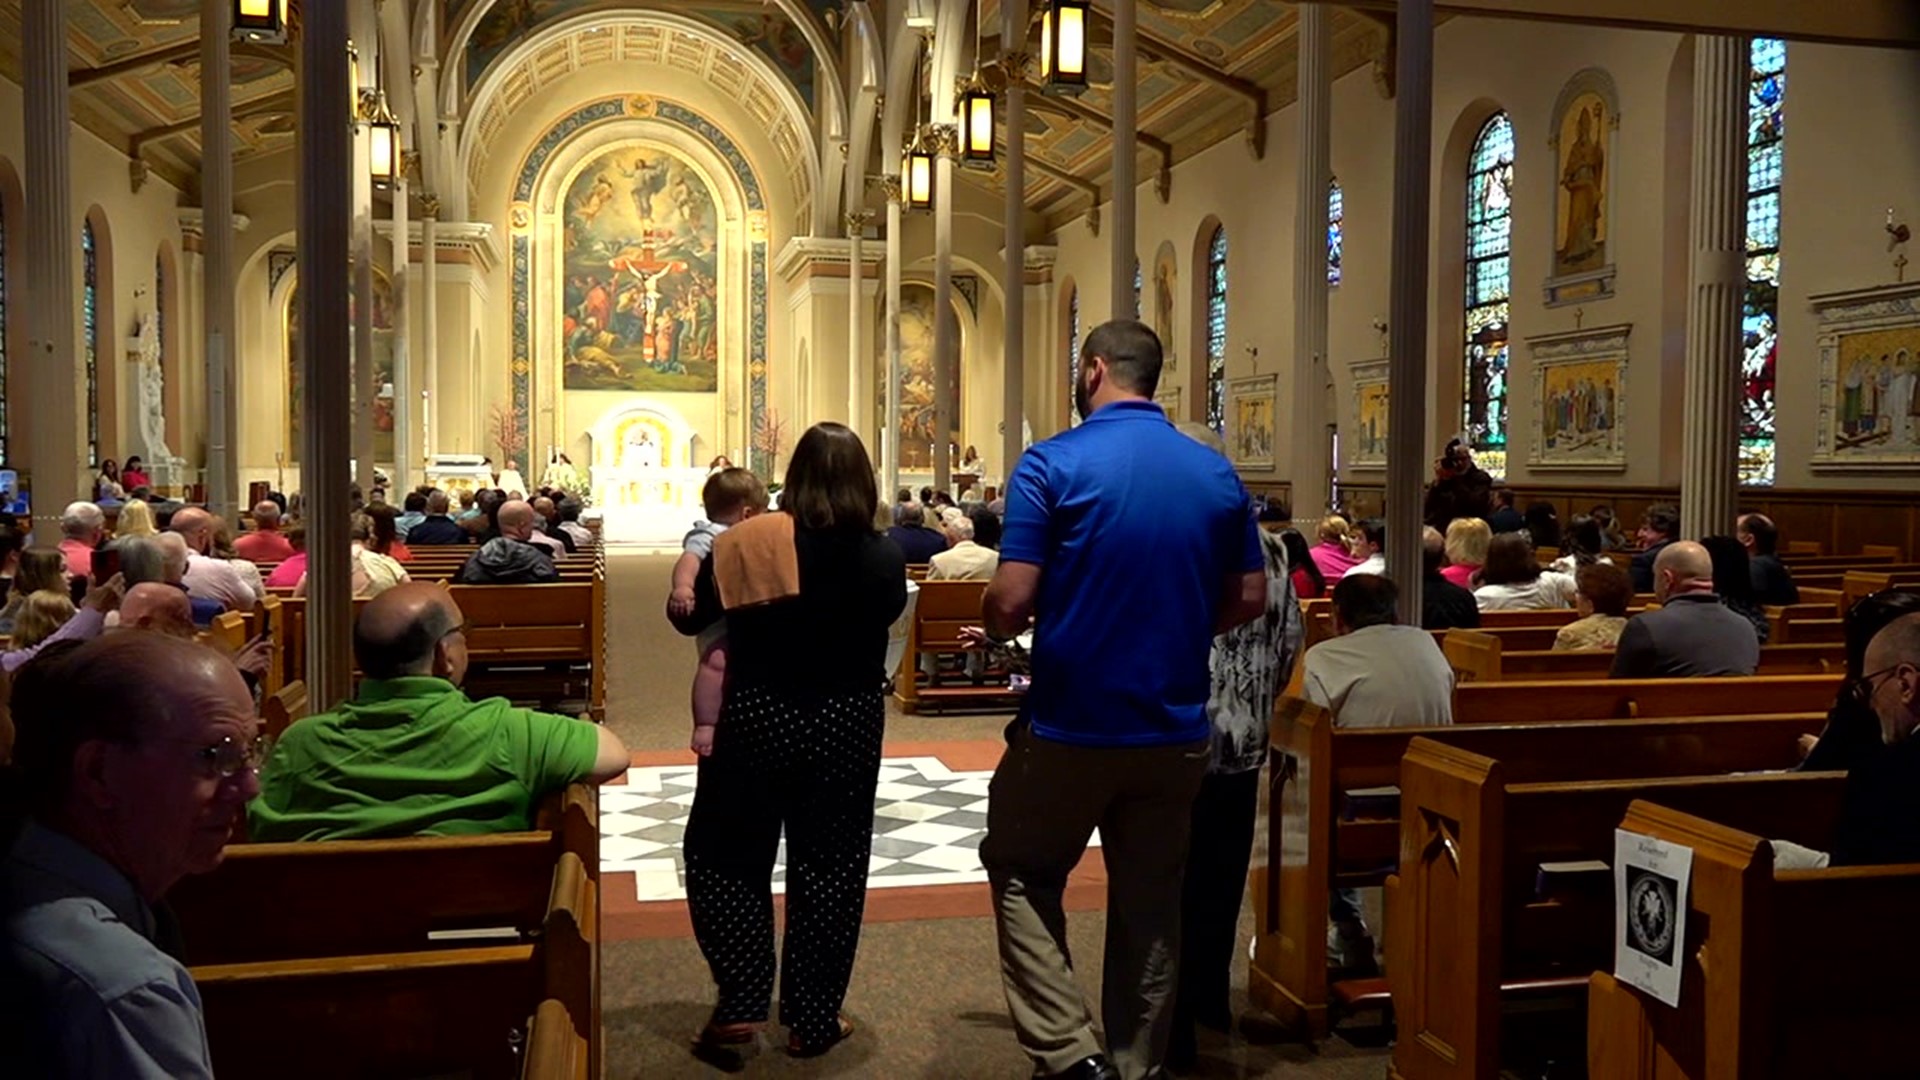 A church in Scranton held a special service for women who are mothers through adoption and the foster care system, making Mother's Day a milestone for many.